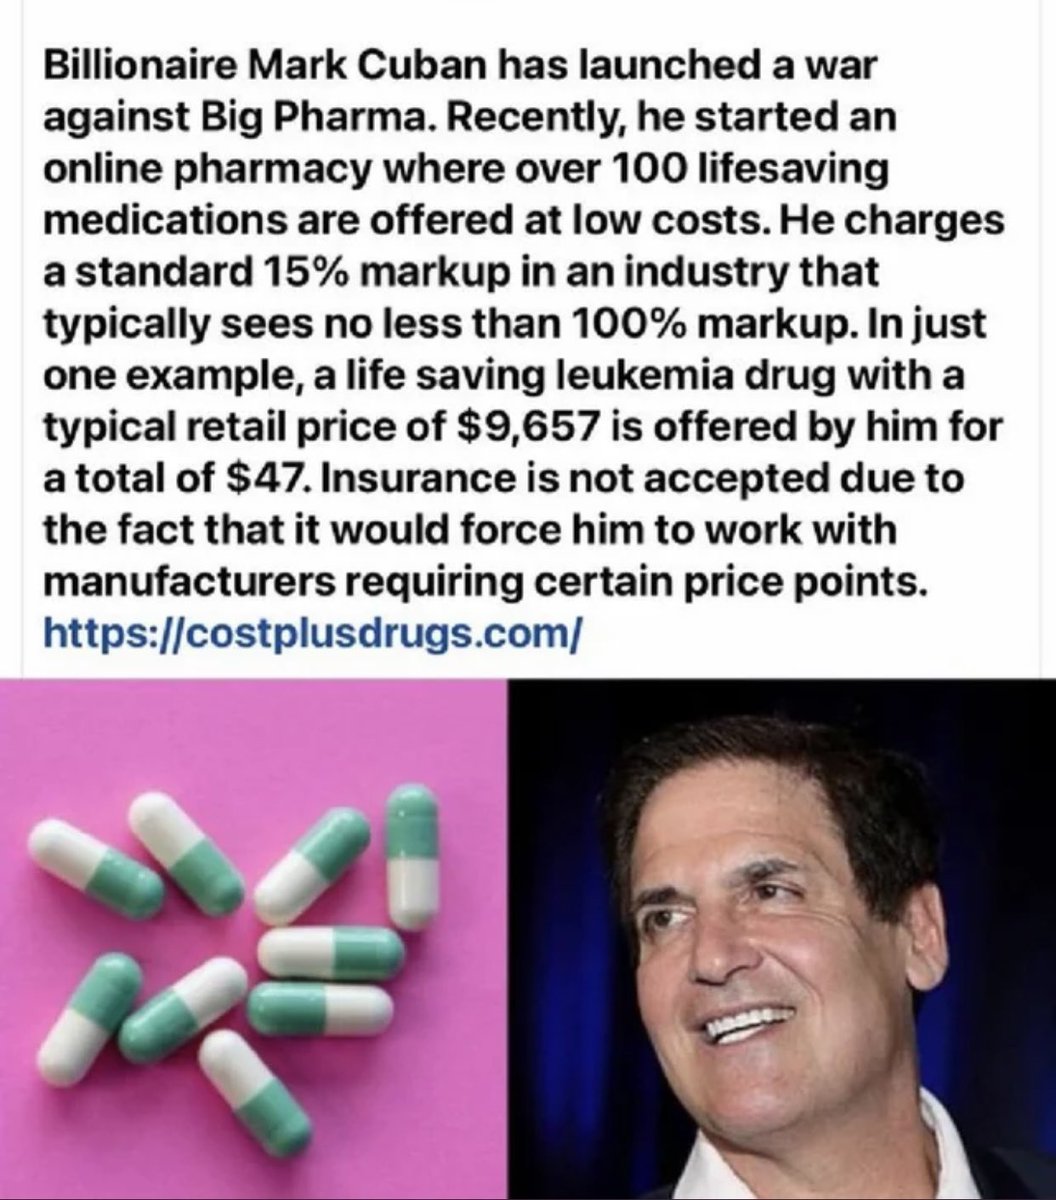 Dudes posting their wins - mark cuban pharmacy meme - Billionaire Mark Cuban has launched a war against Big Pharma. Recently, he started an online pharmacy where over 100 lifesaving medications are offered at low costs. He charges a standard 15% markup in